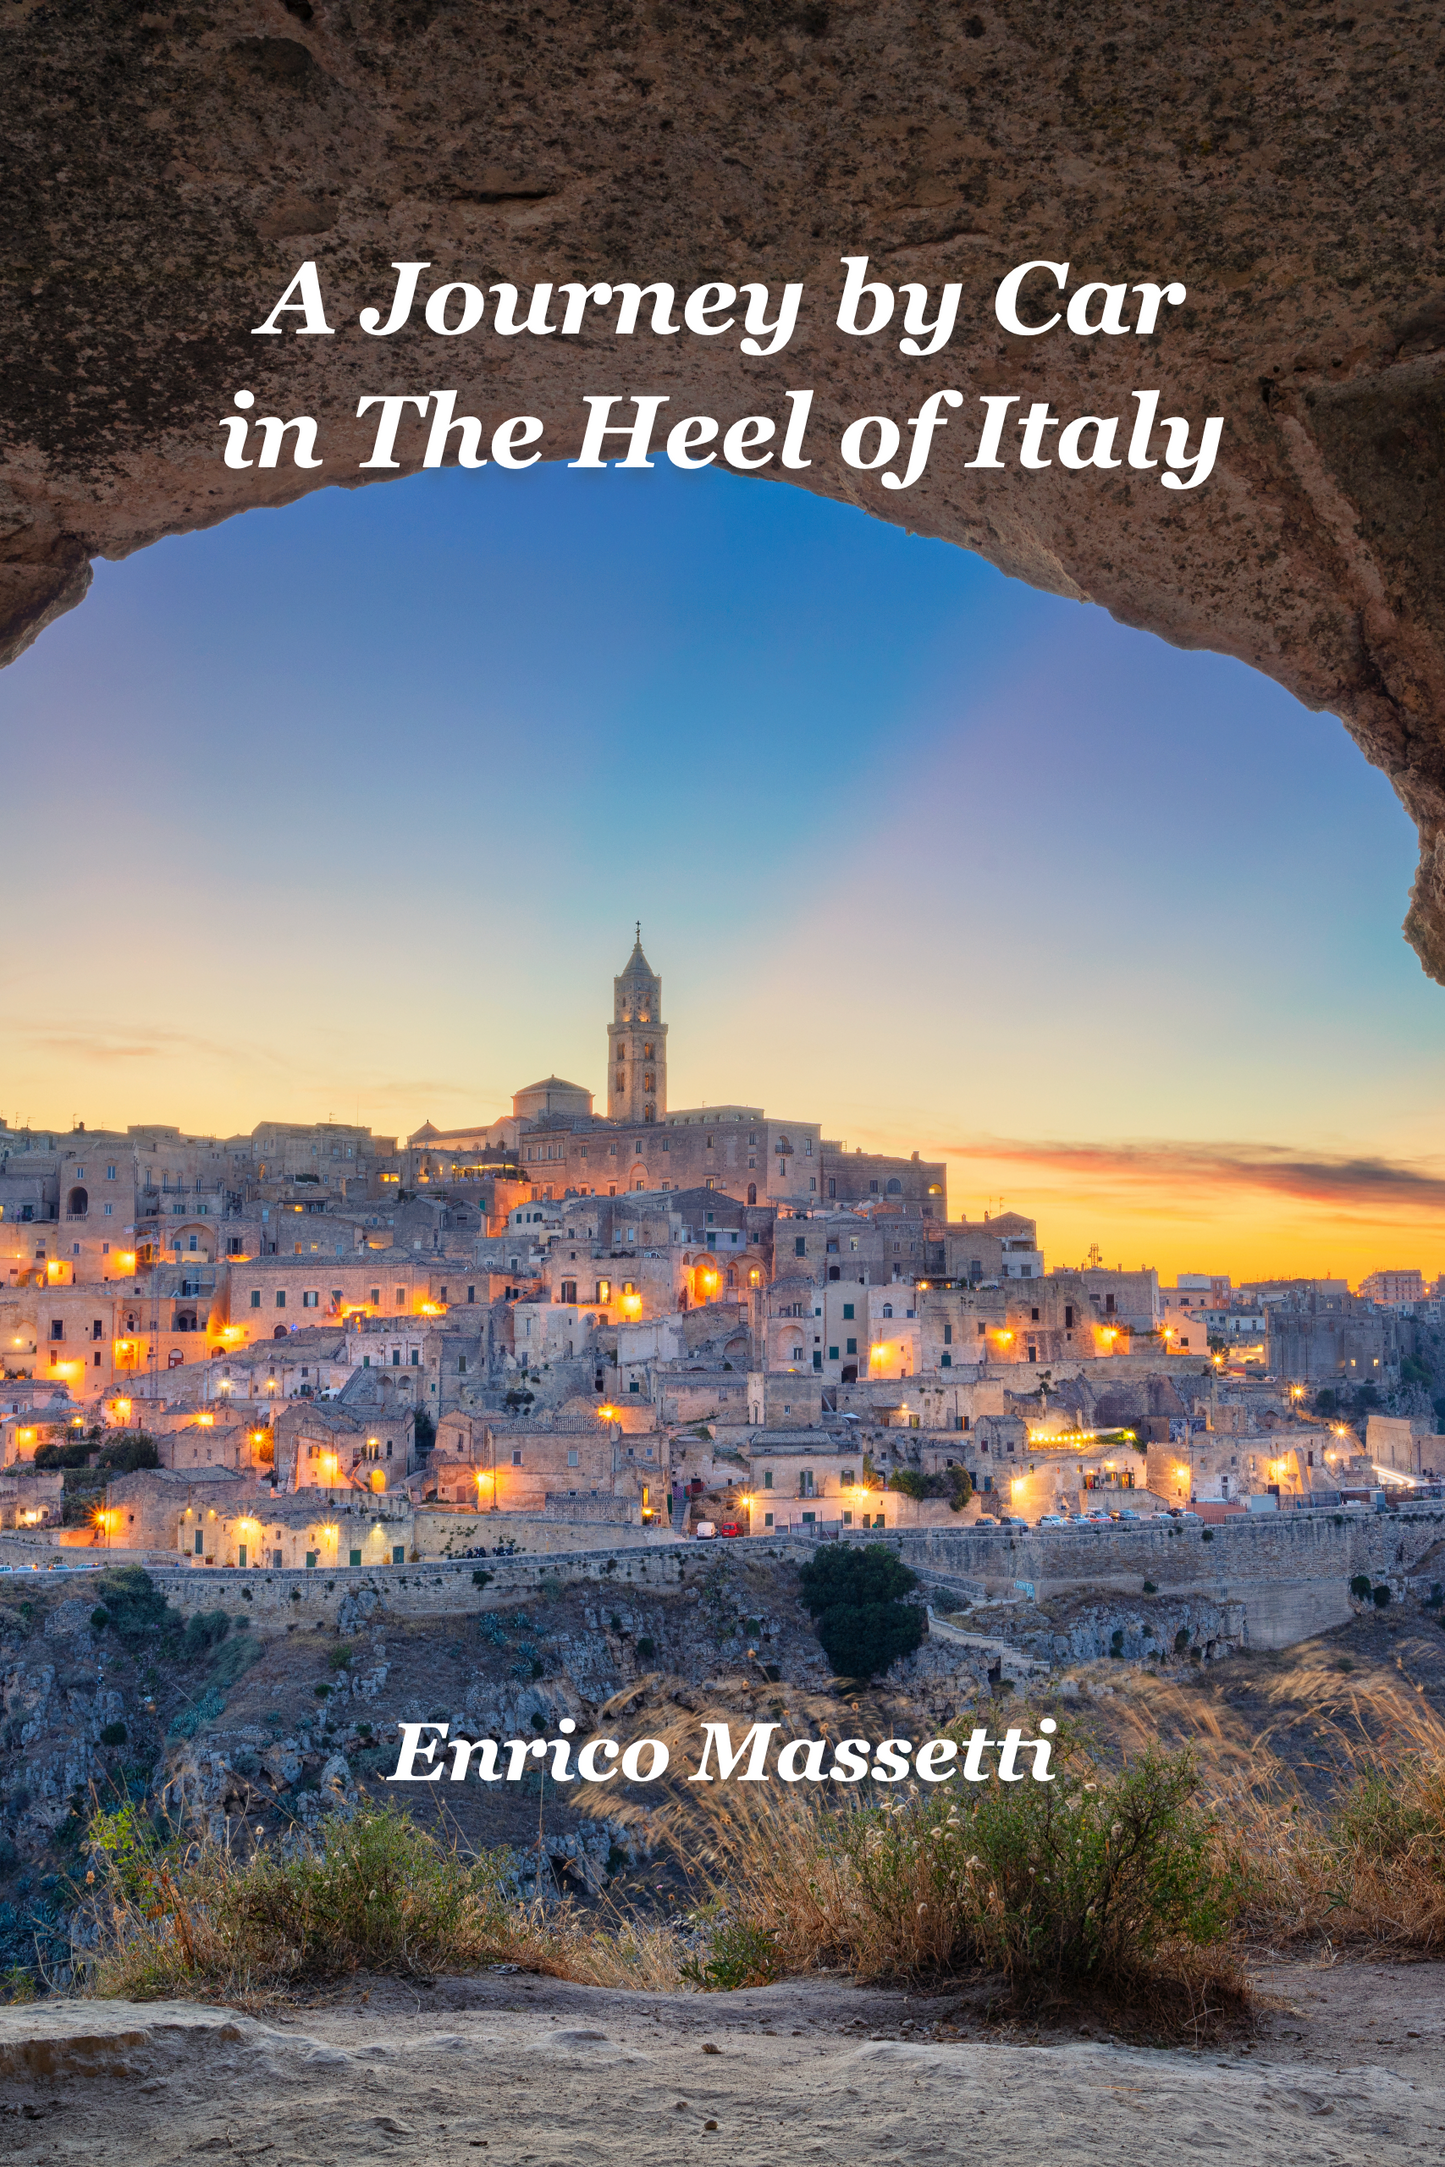 A Journey by Car in The Heel of Italy